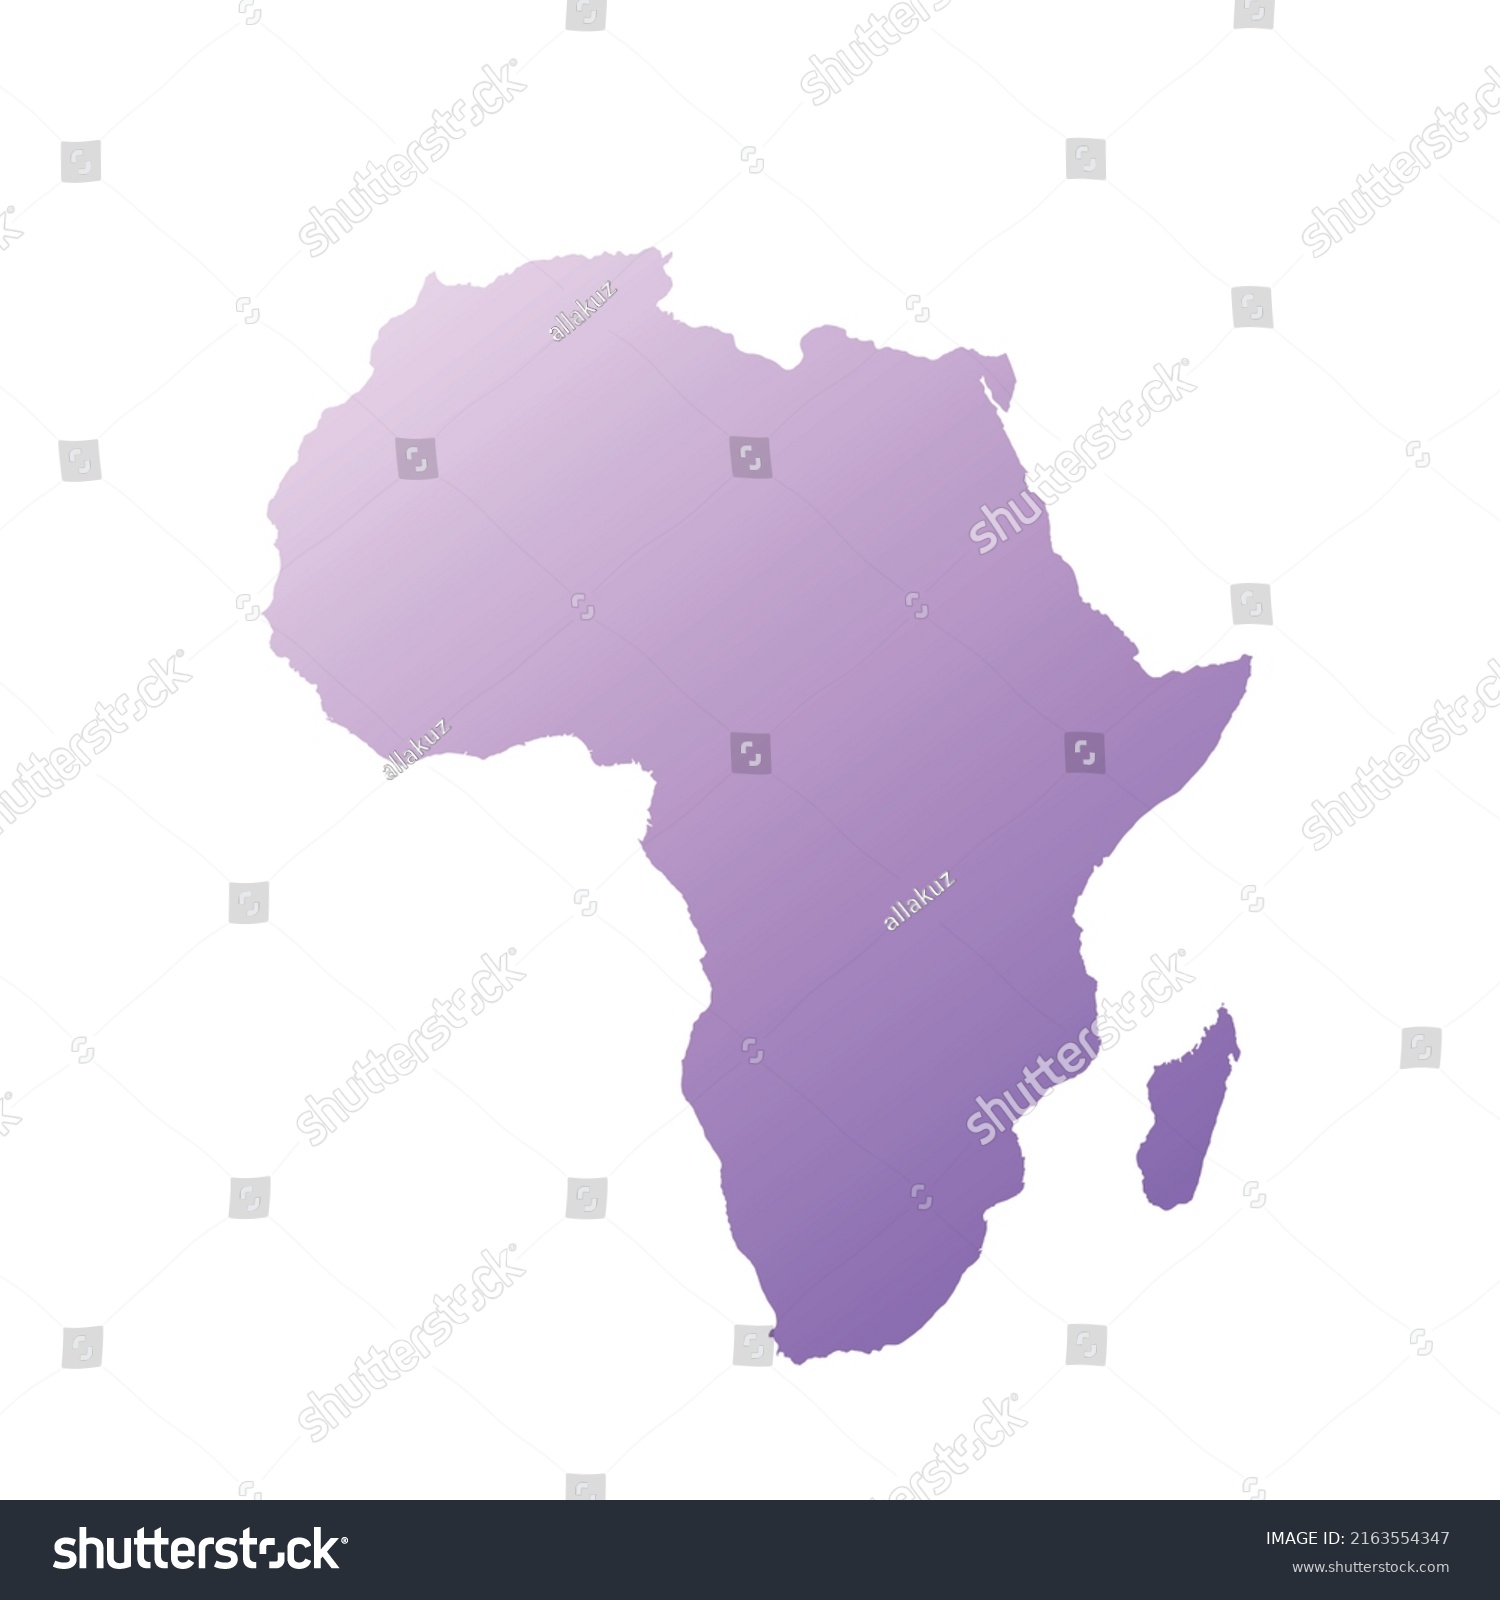 Stock Vector Map Of Africa Sign Silhouette World Map Globe Vector Isolated Color Illustration African 2163554347 